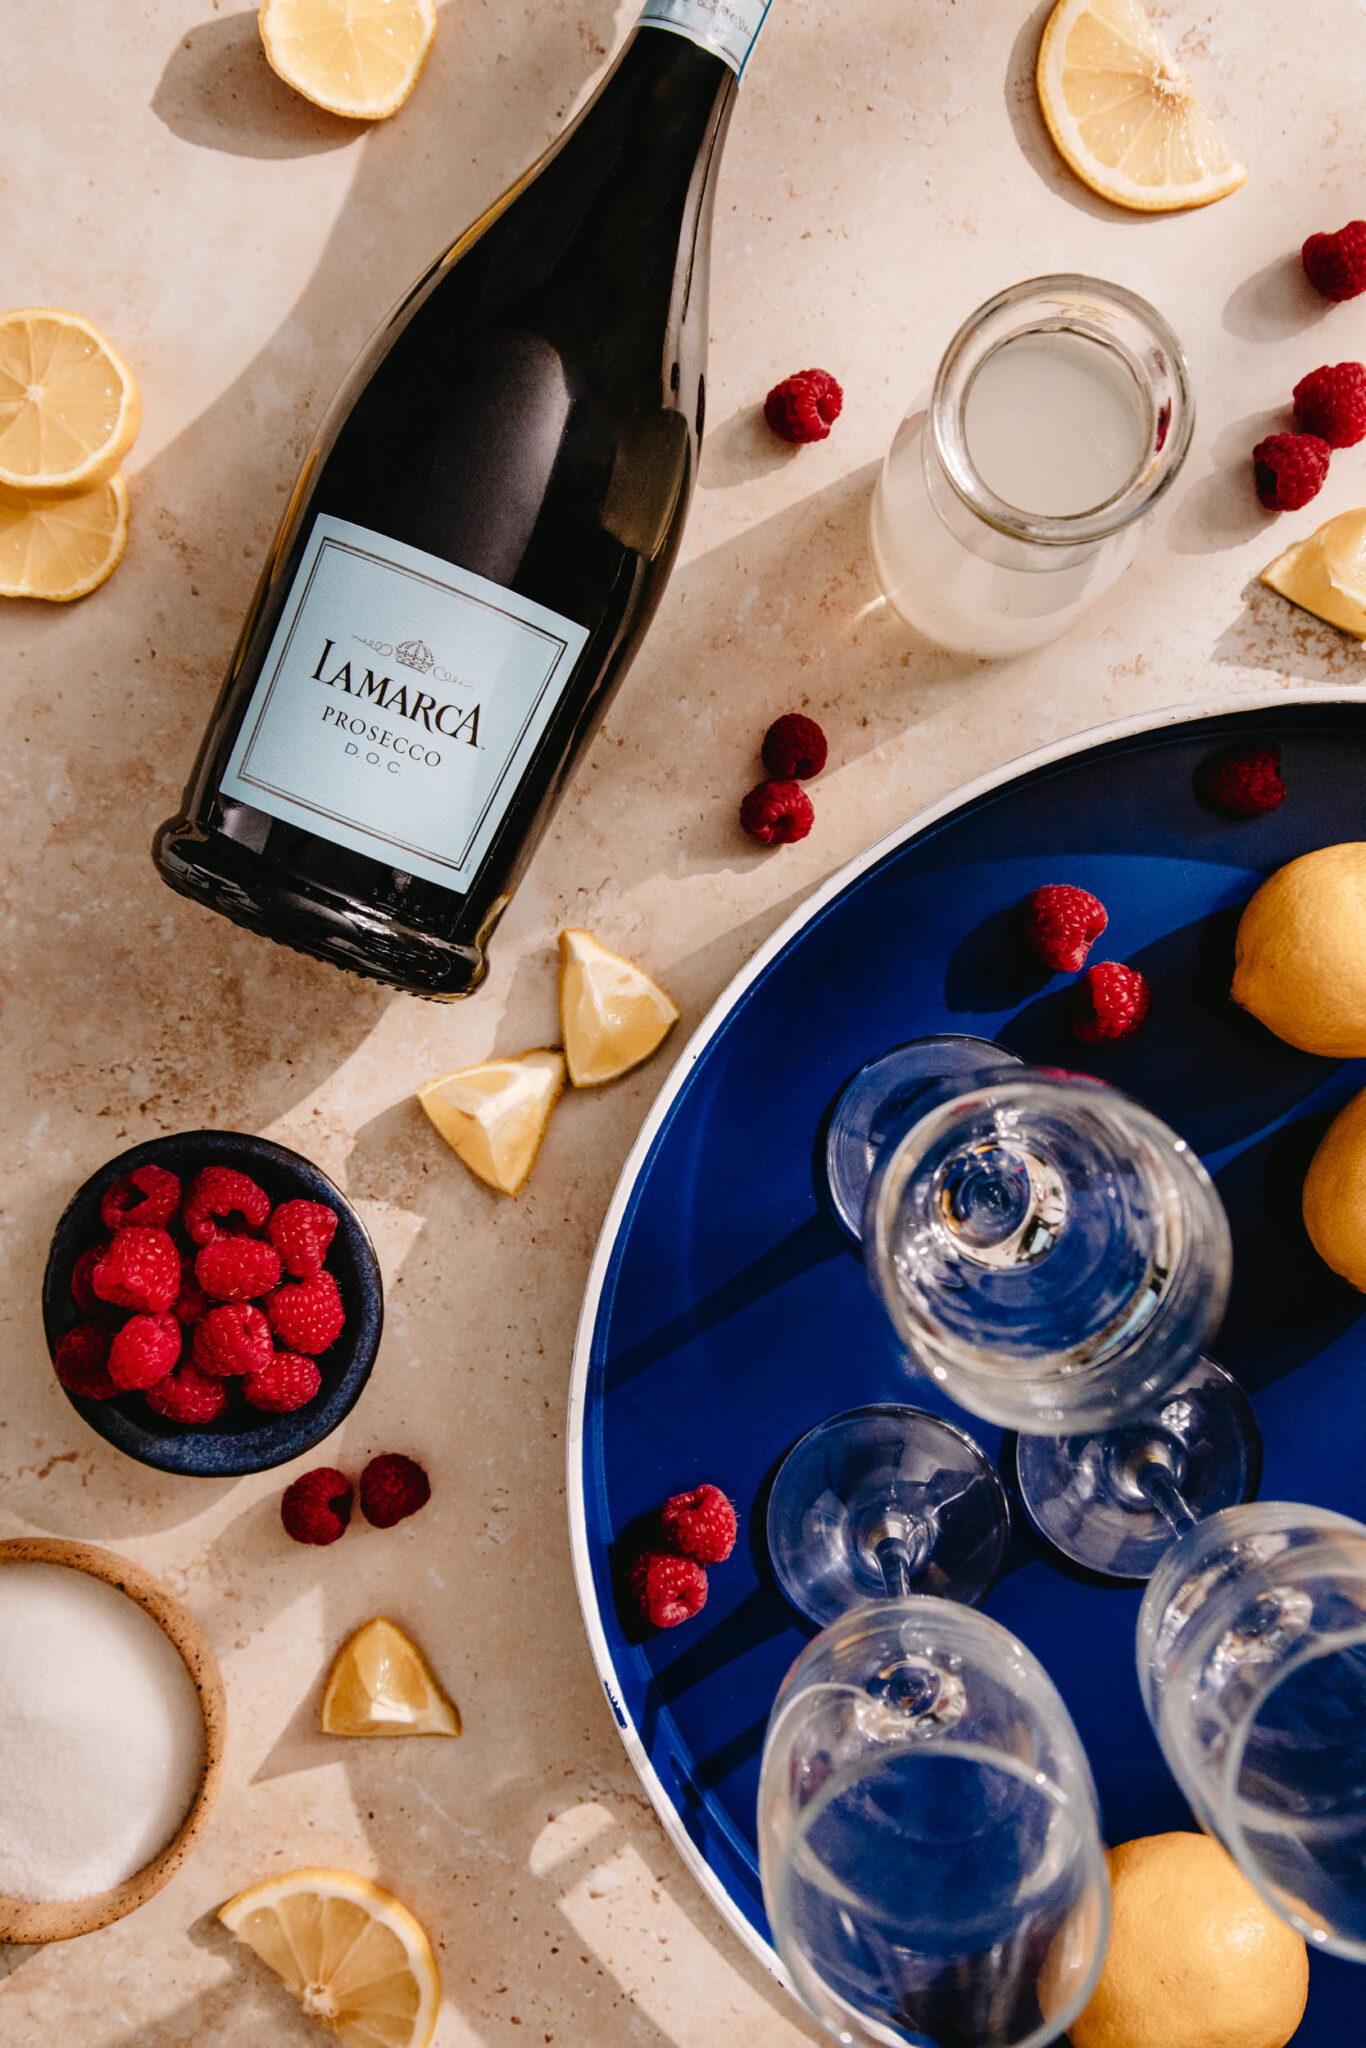 Overhead view of a blue tray with empty champagne glasses, a bottle of sparkling wine, and slices of lemon and fresh raspberries.